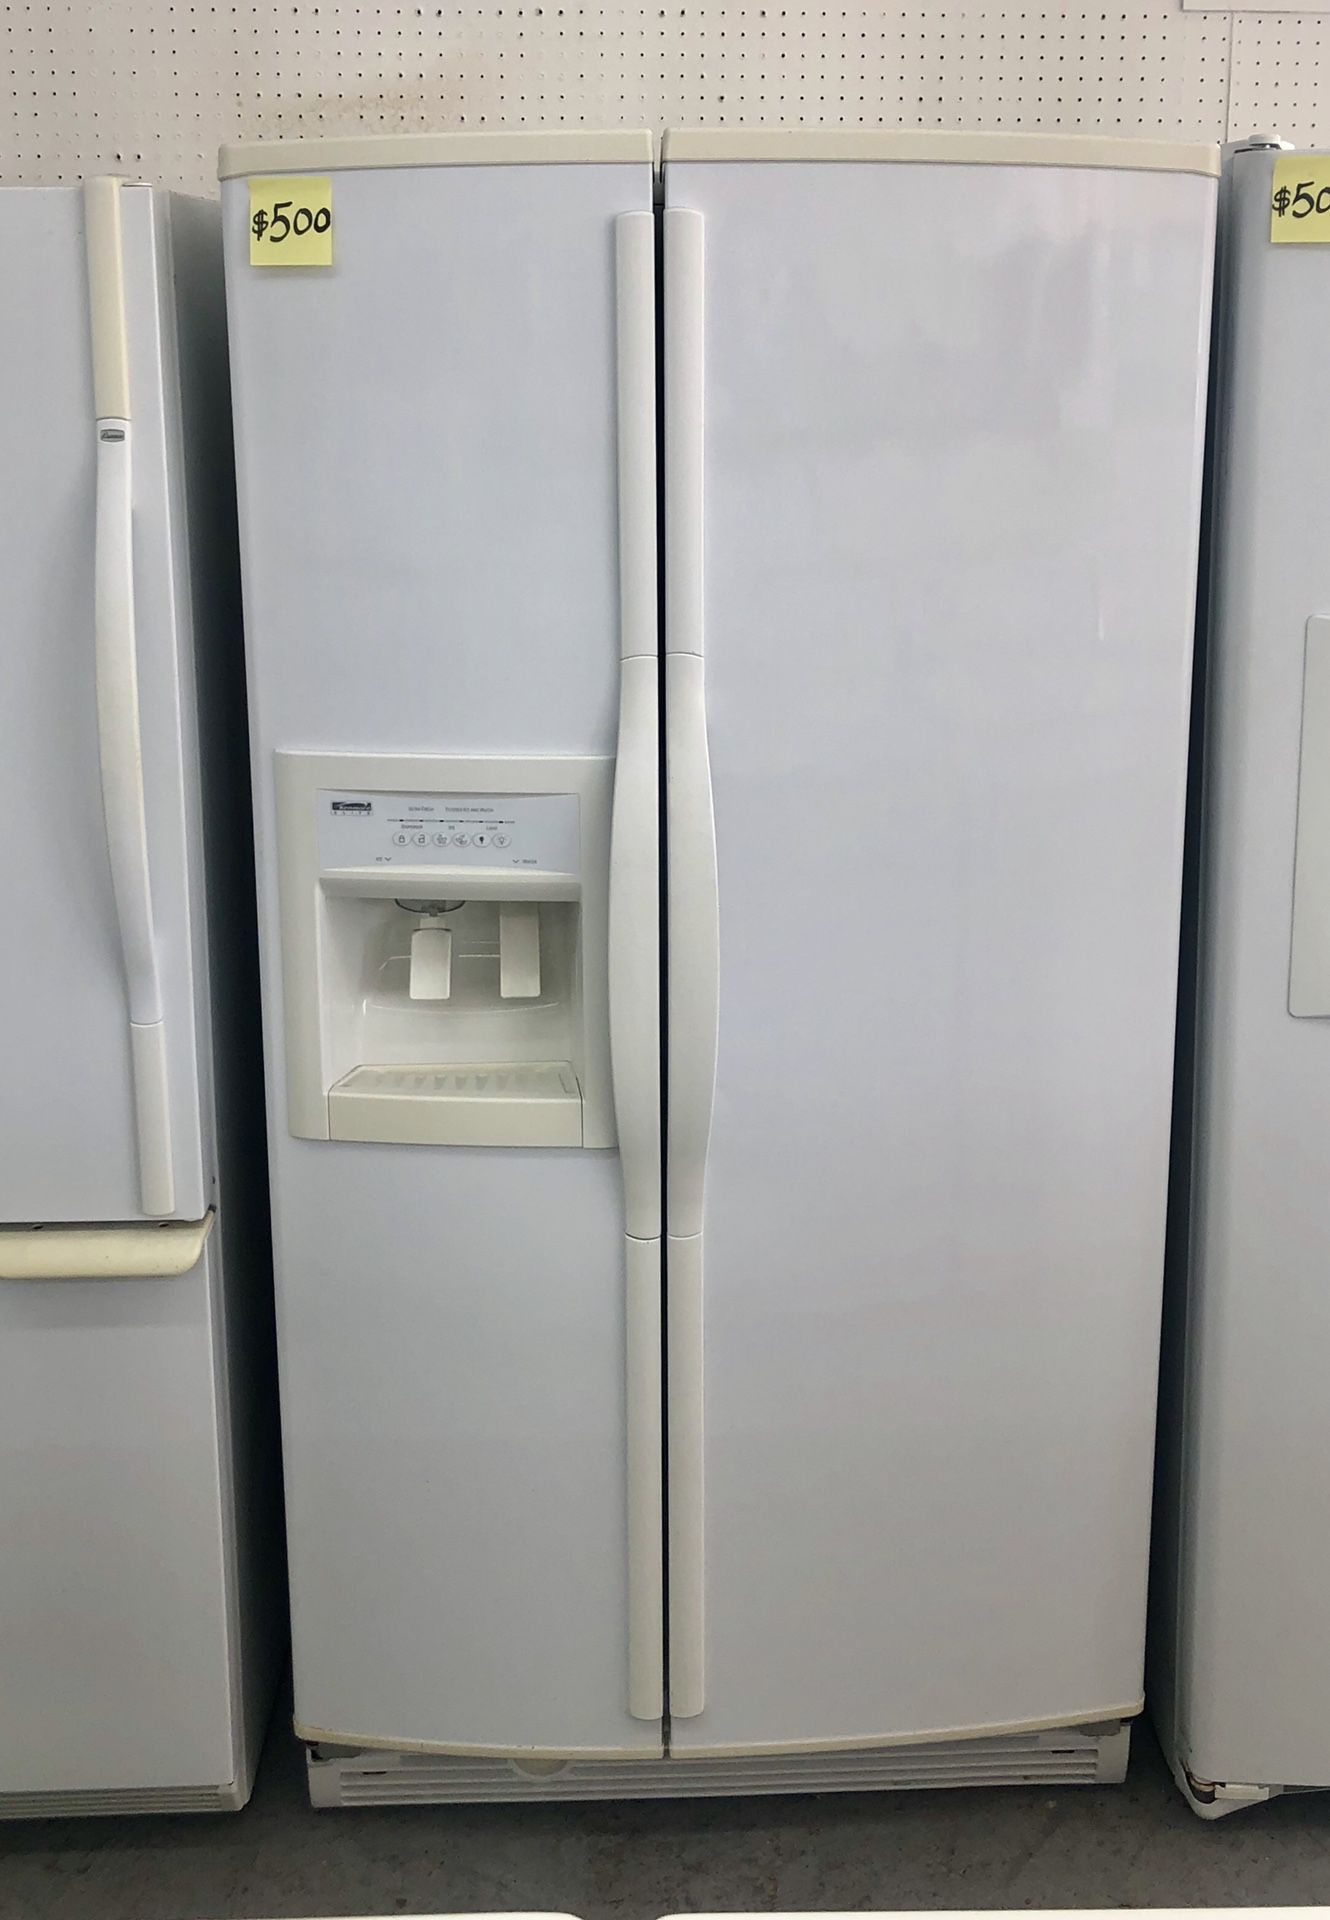 Comes with free 6 Months Warranty-like new white side by side refrigerator Kenmore Elite